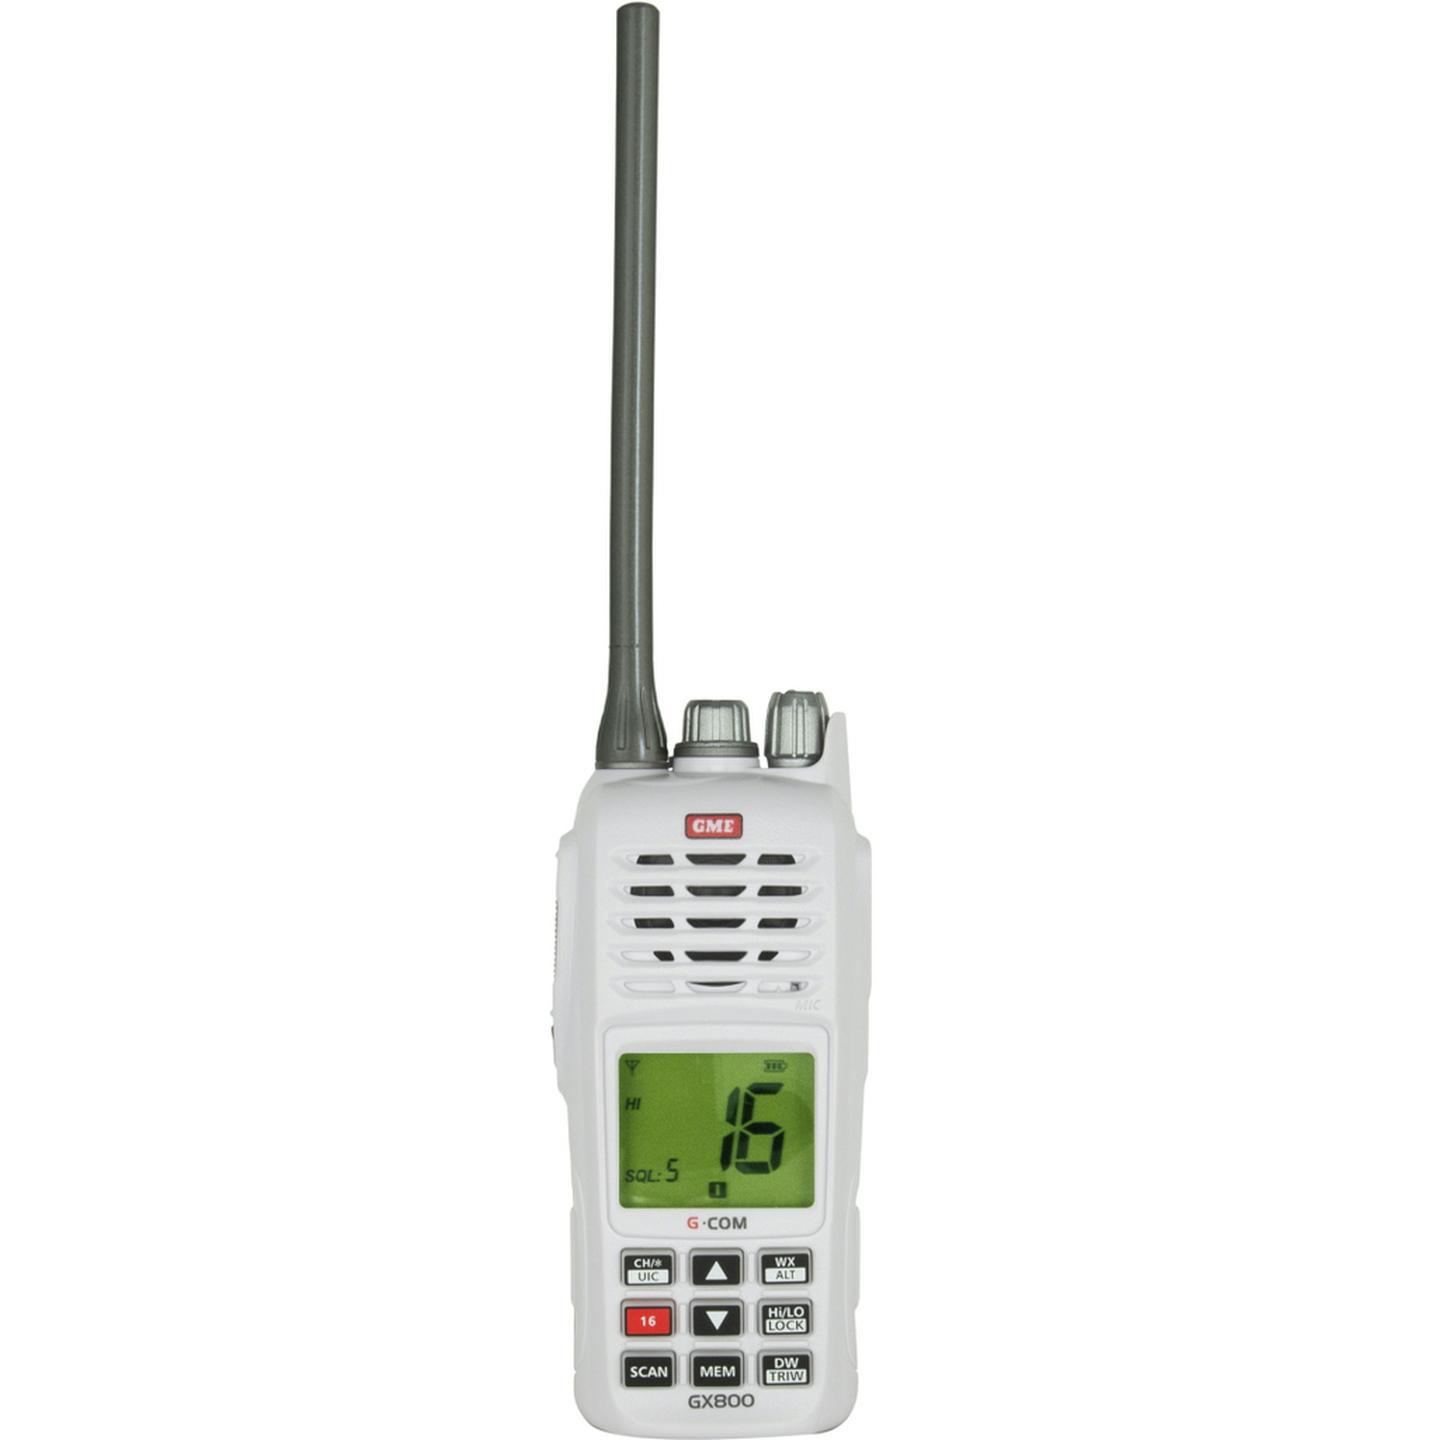 5W GME Handheld VHF Marine Transceiver Radio with Flash and Float GX800W